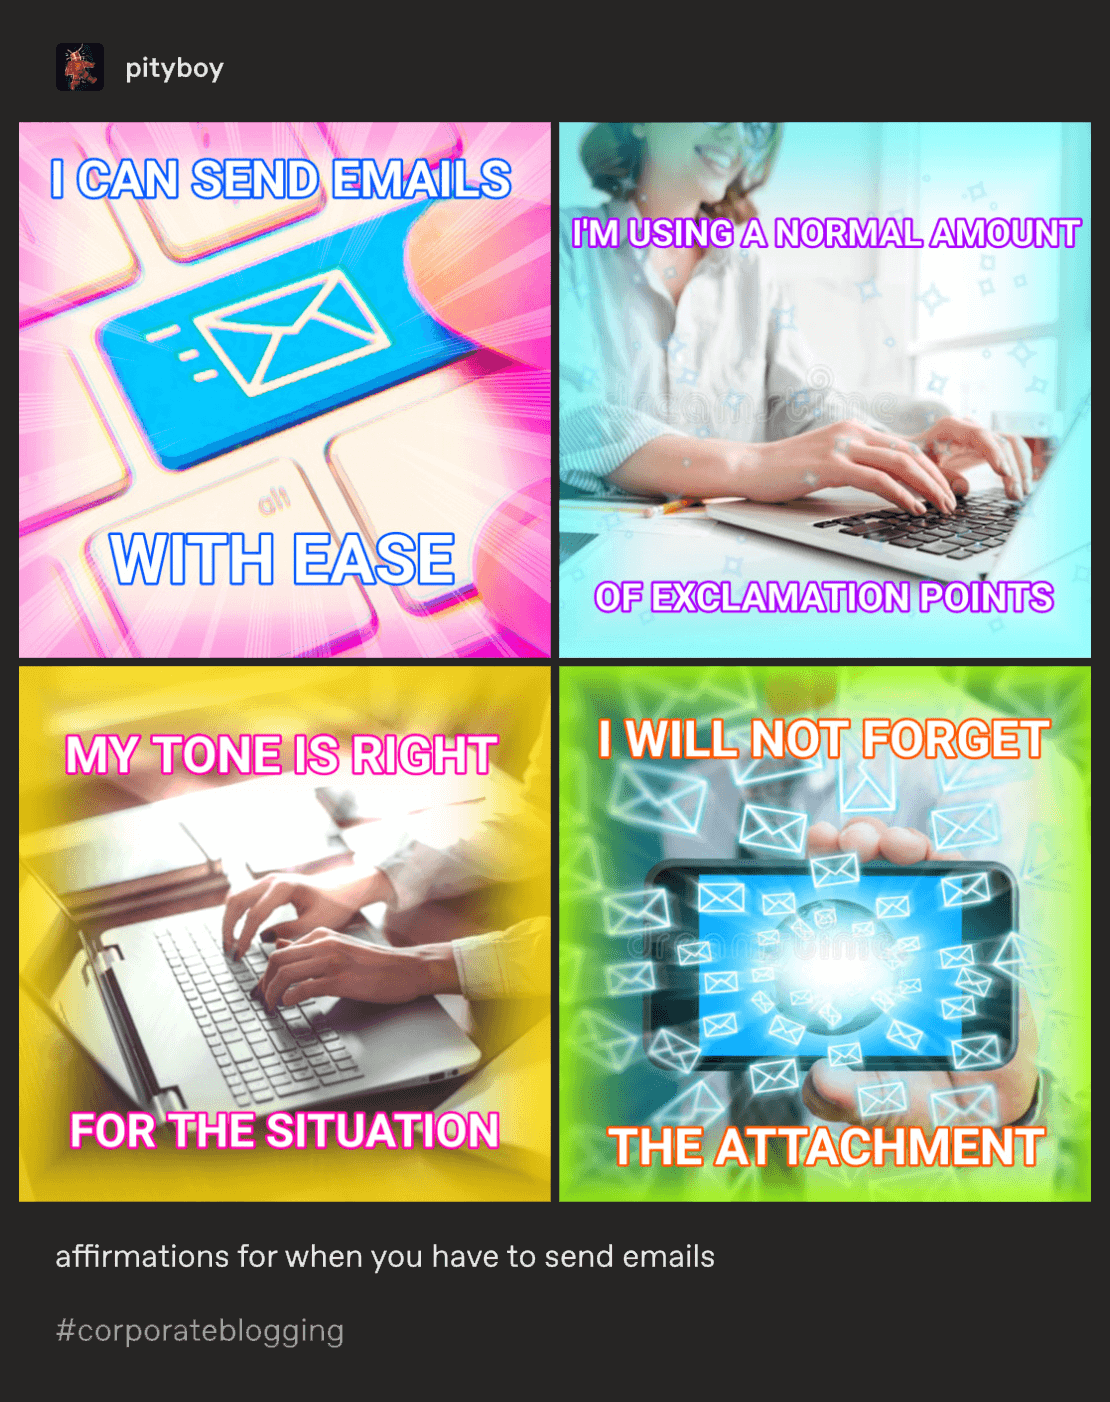 @pityboy on tumblr: affirmations for when you have to send emails. 2 photos - I can send emails with ease, I'm using a normal amount of exlamation points, My tone is right for the situation, I will not forget the attachment.